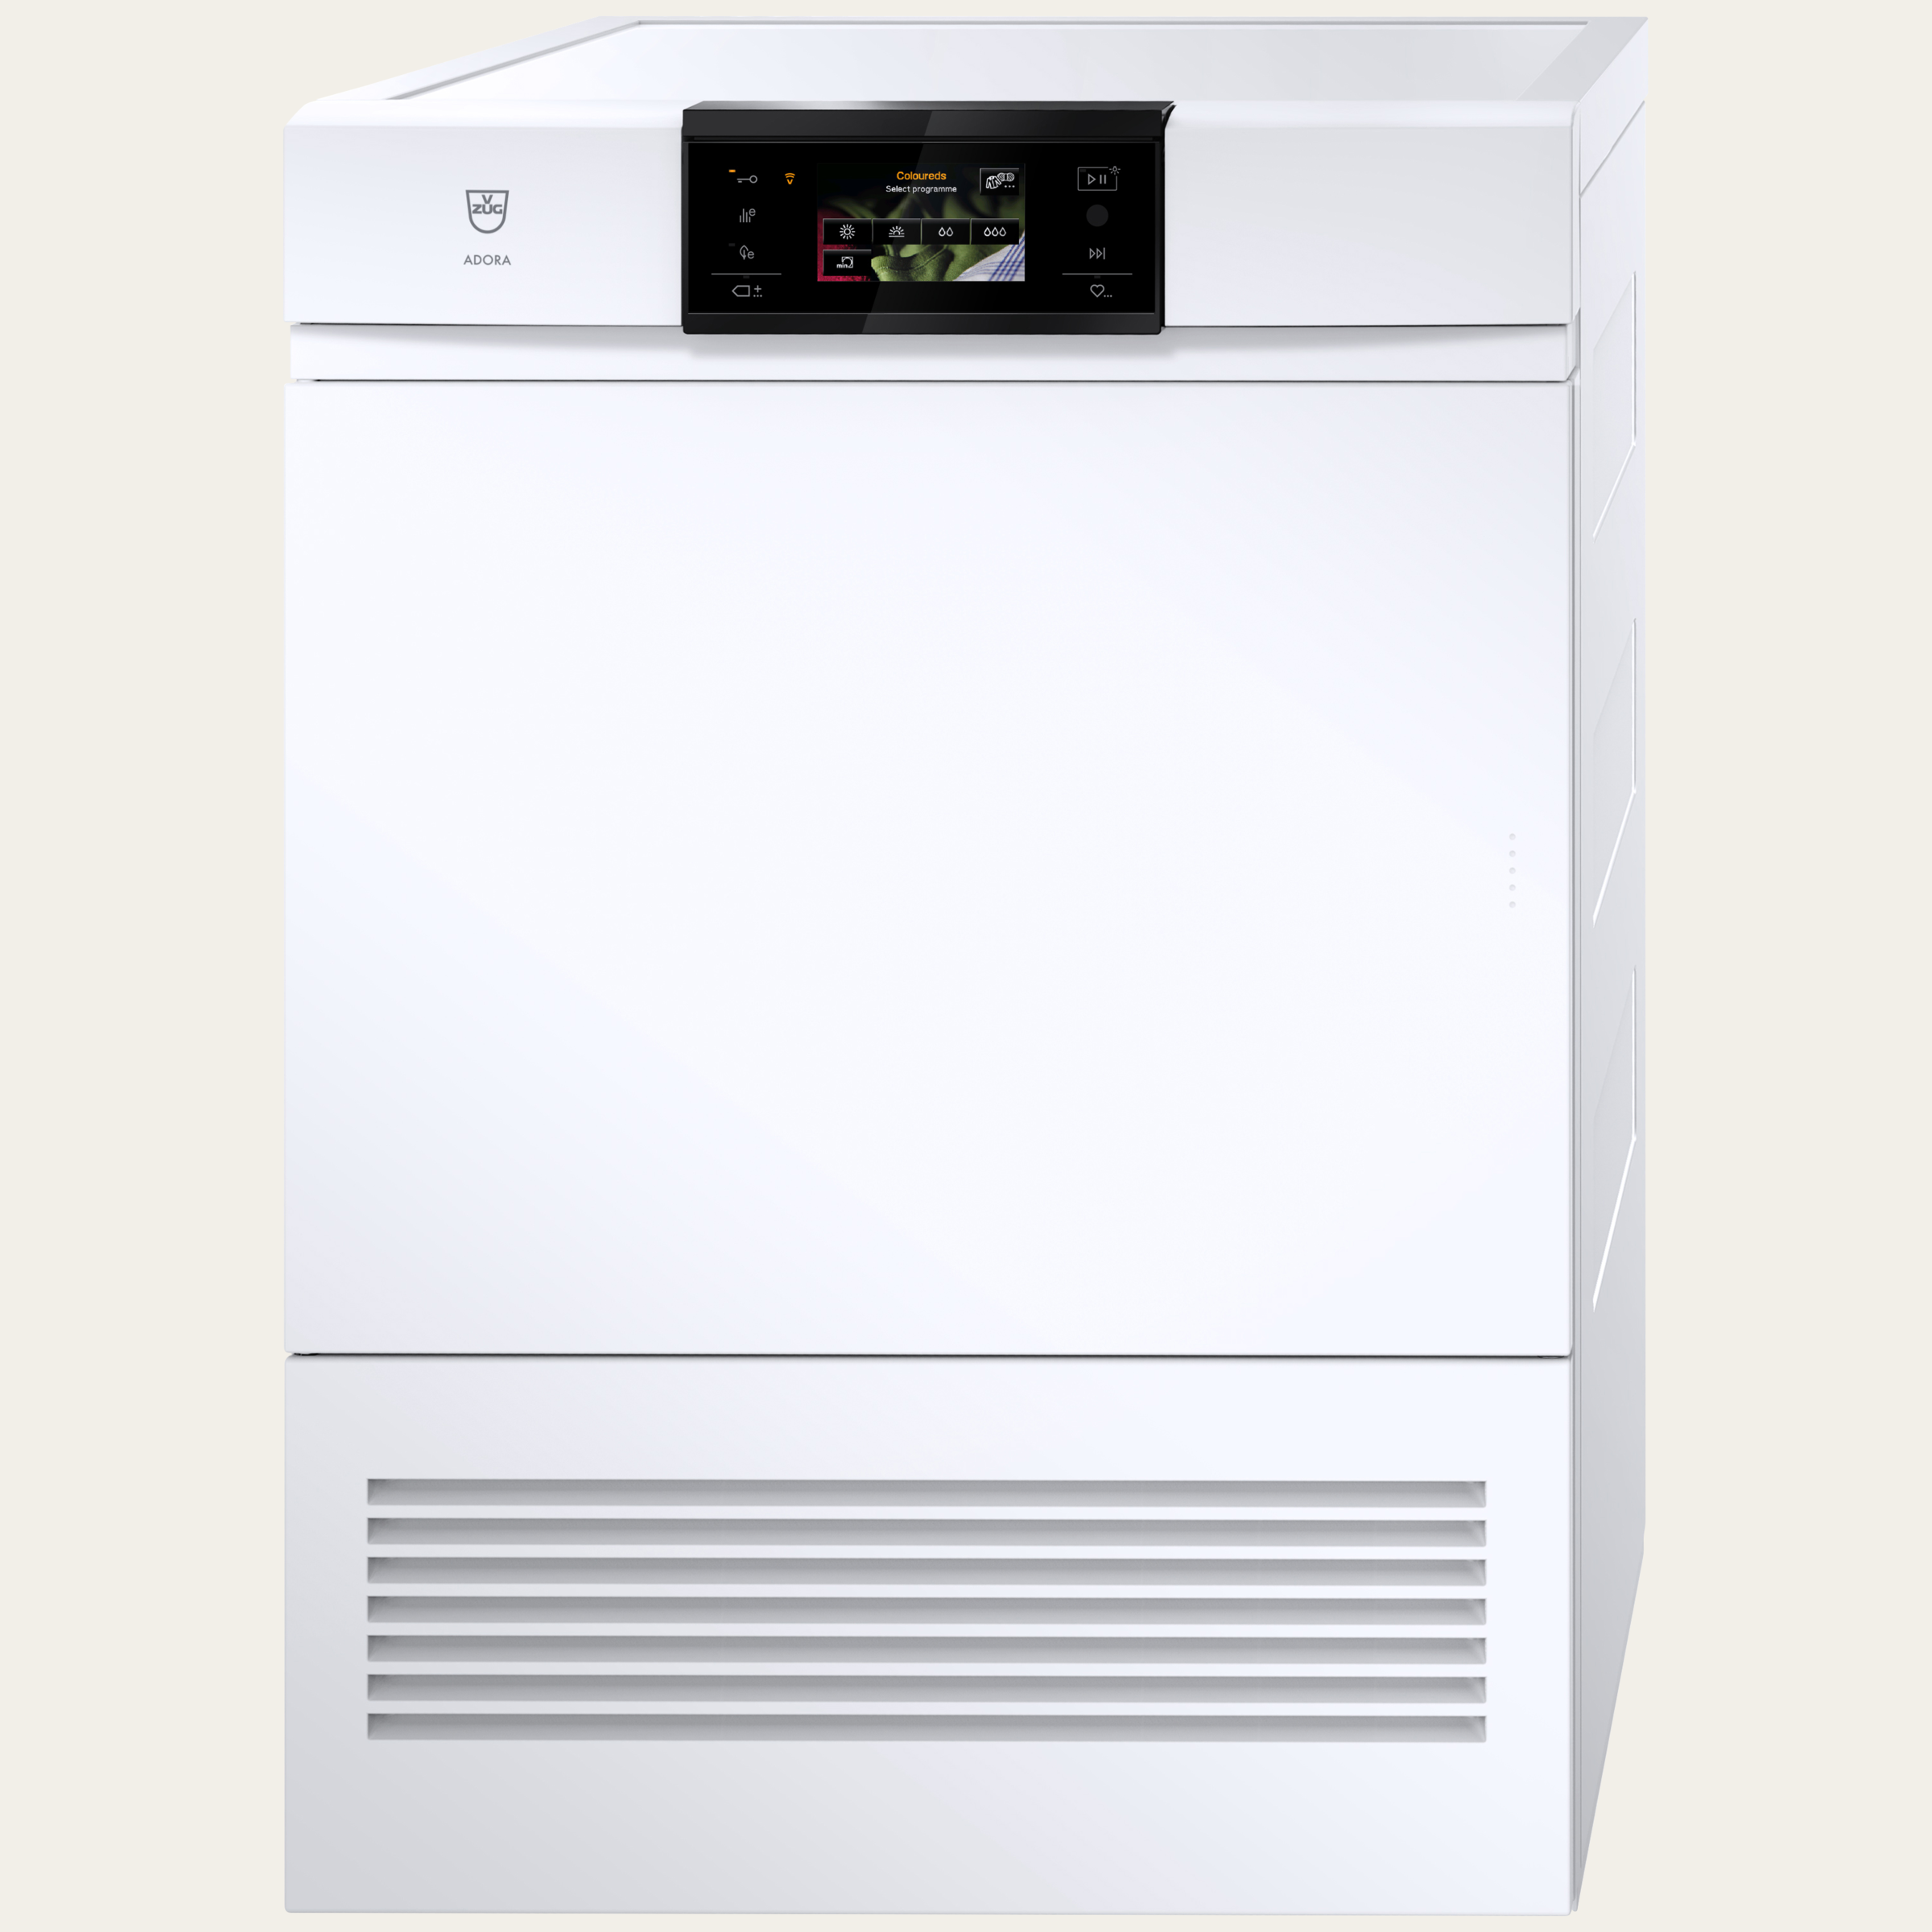 V-ZUG Tumble dryer AdoraDry V6000, Door hinge: Right, Nominal capacity: 7 kg, Full-colour graphic display, touchscreen